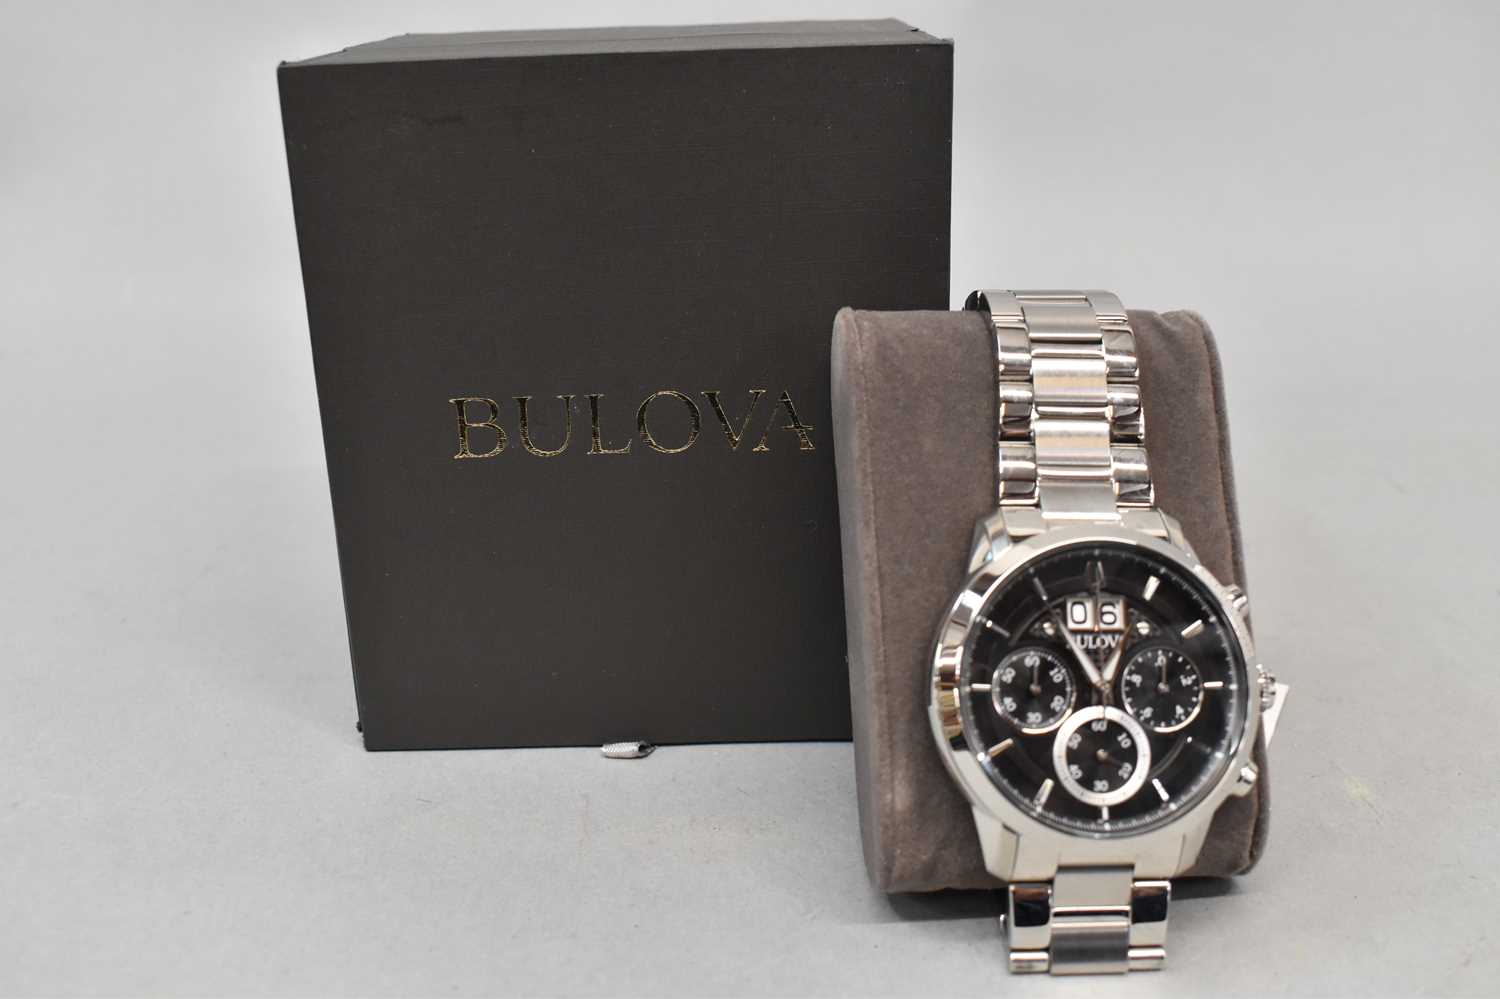 BULOVA; a gentleman's chronograph stainless steel wristwatch, boxed and unused.